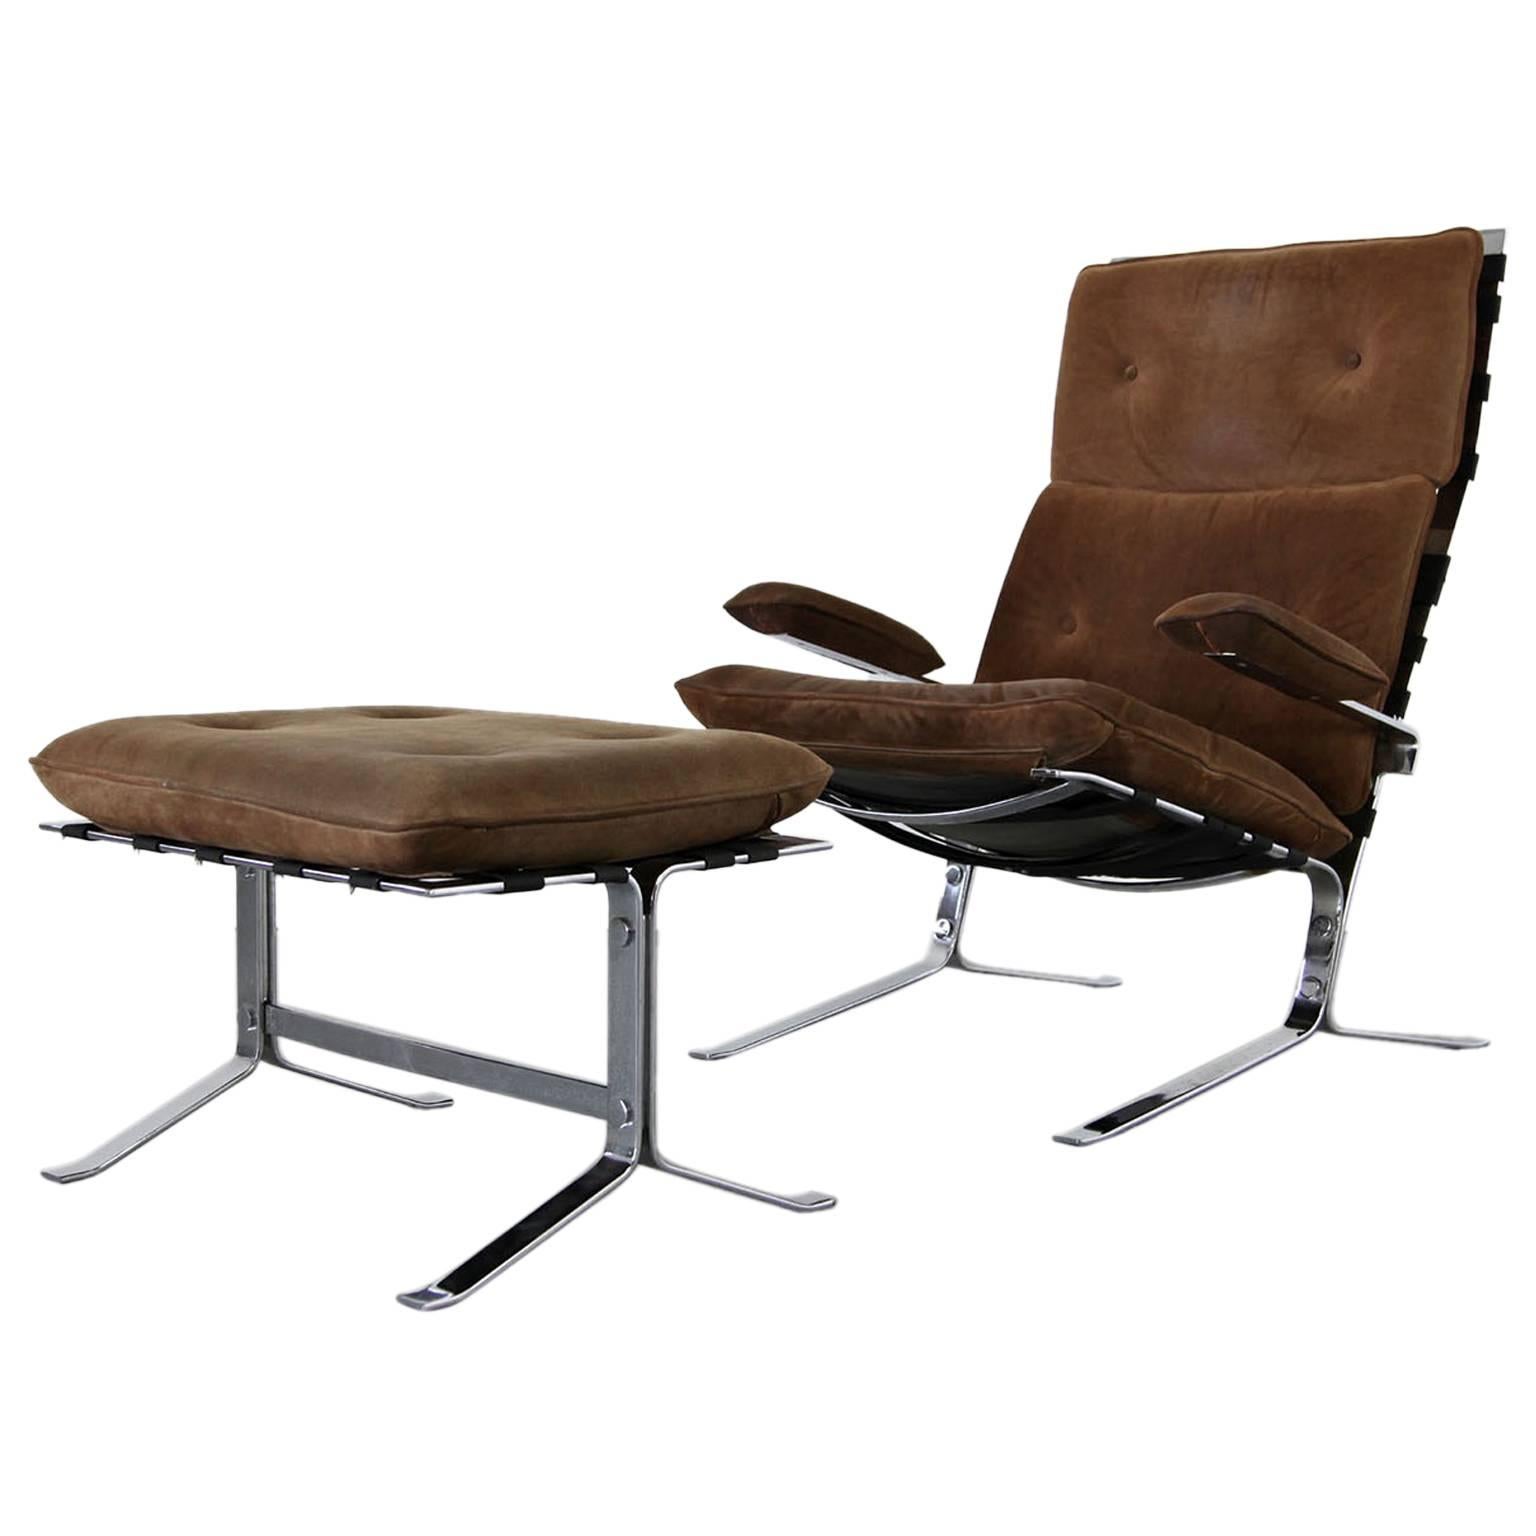 Suede Lounge Chair "Joker" by Olivier Mourgue for Airborne For Sale